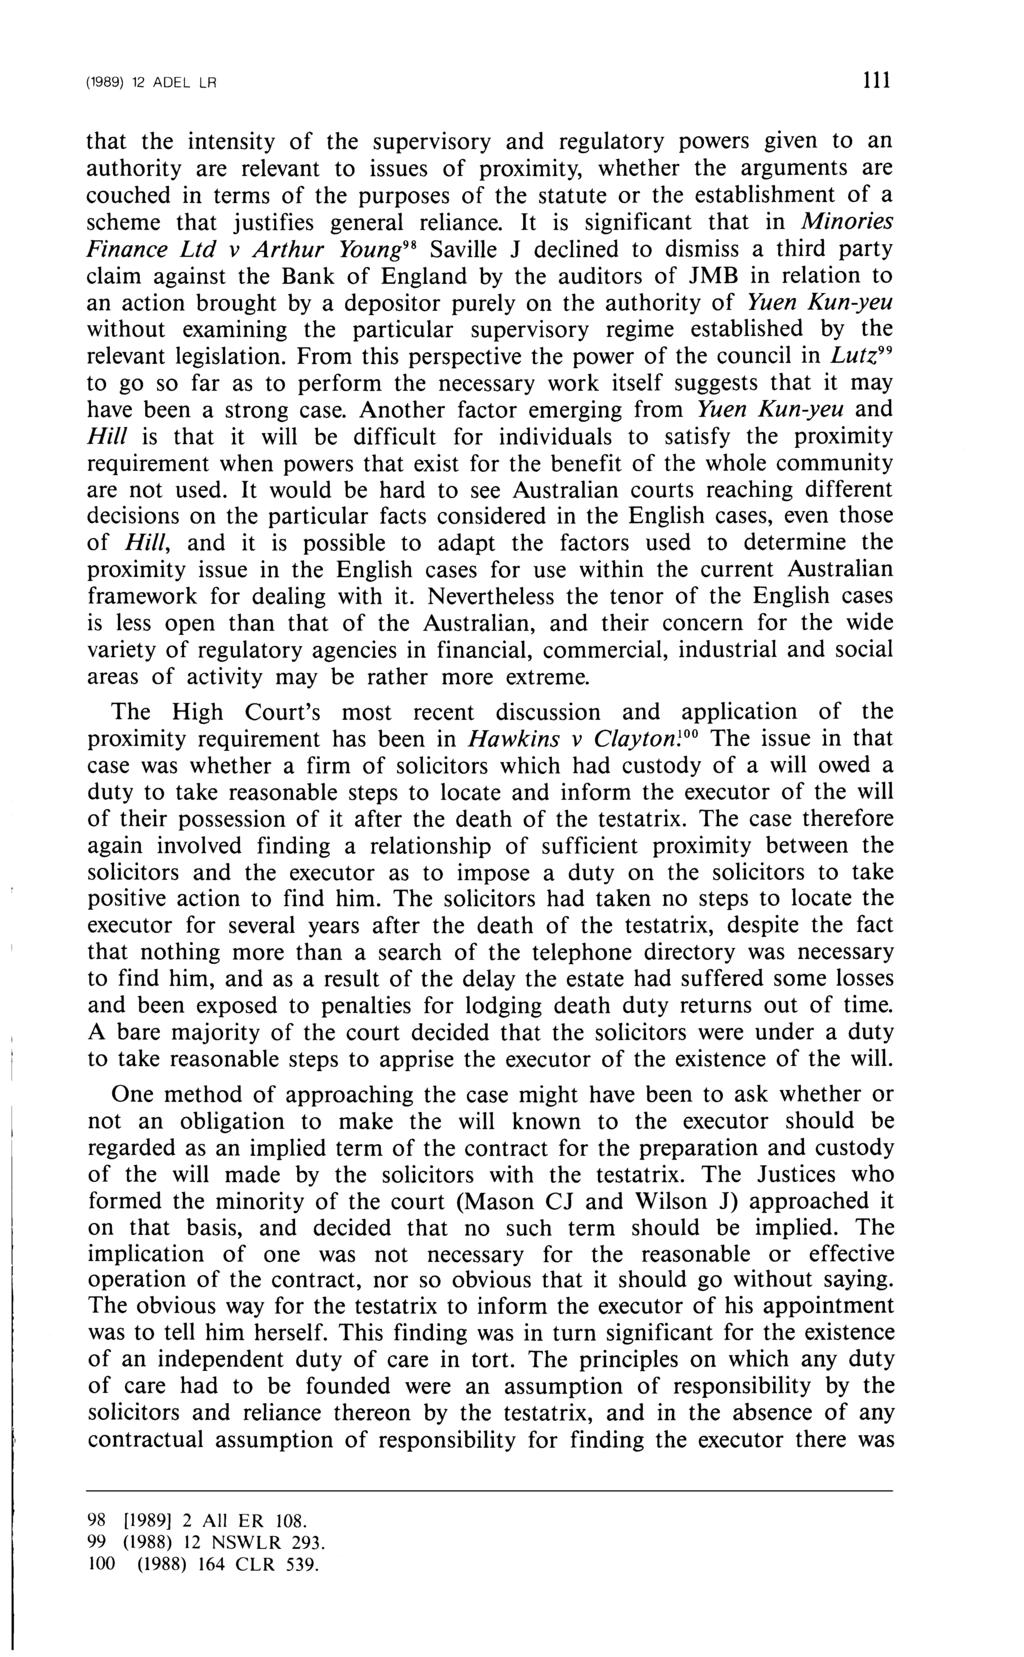 (1989) 12 ADEL LR 111 that the intensity of the supervisory and regulatory powers given to an authority are relevant to issues of proximity, whether the arguments are couched in terms of the purposes